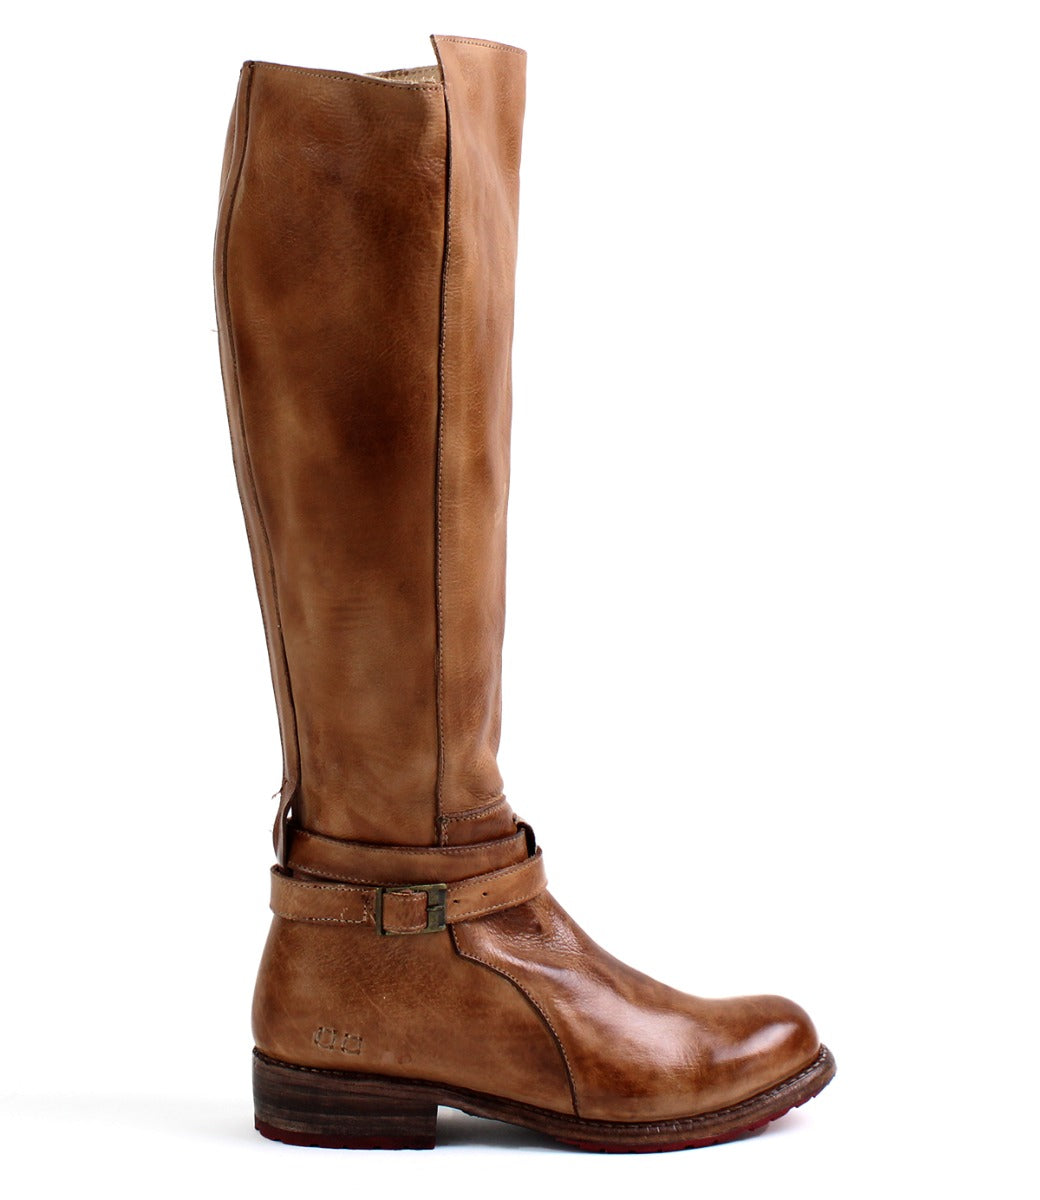 A women's brown leather riding boot with buckles, the Bristol Wide Calf by Bed Stu.